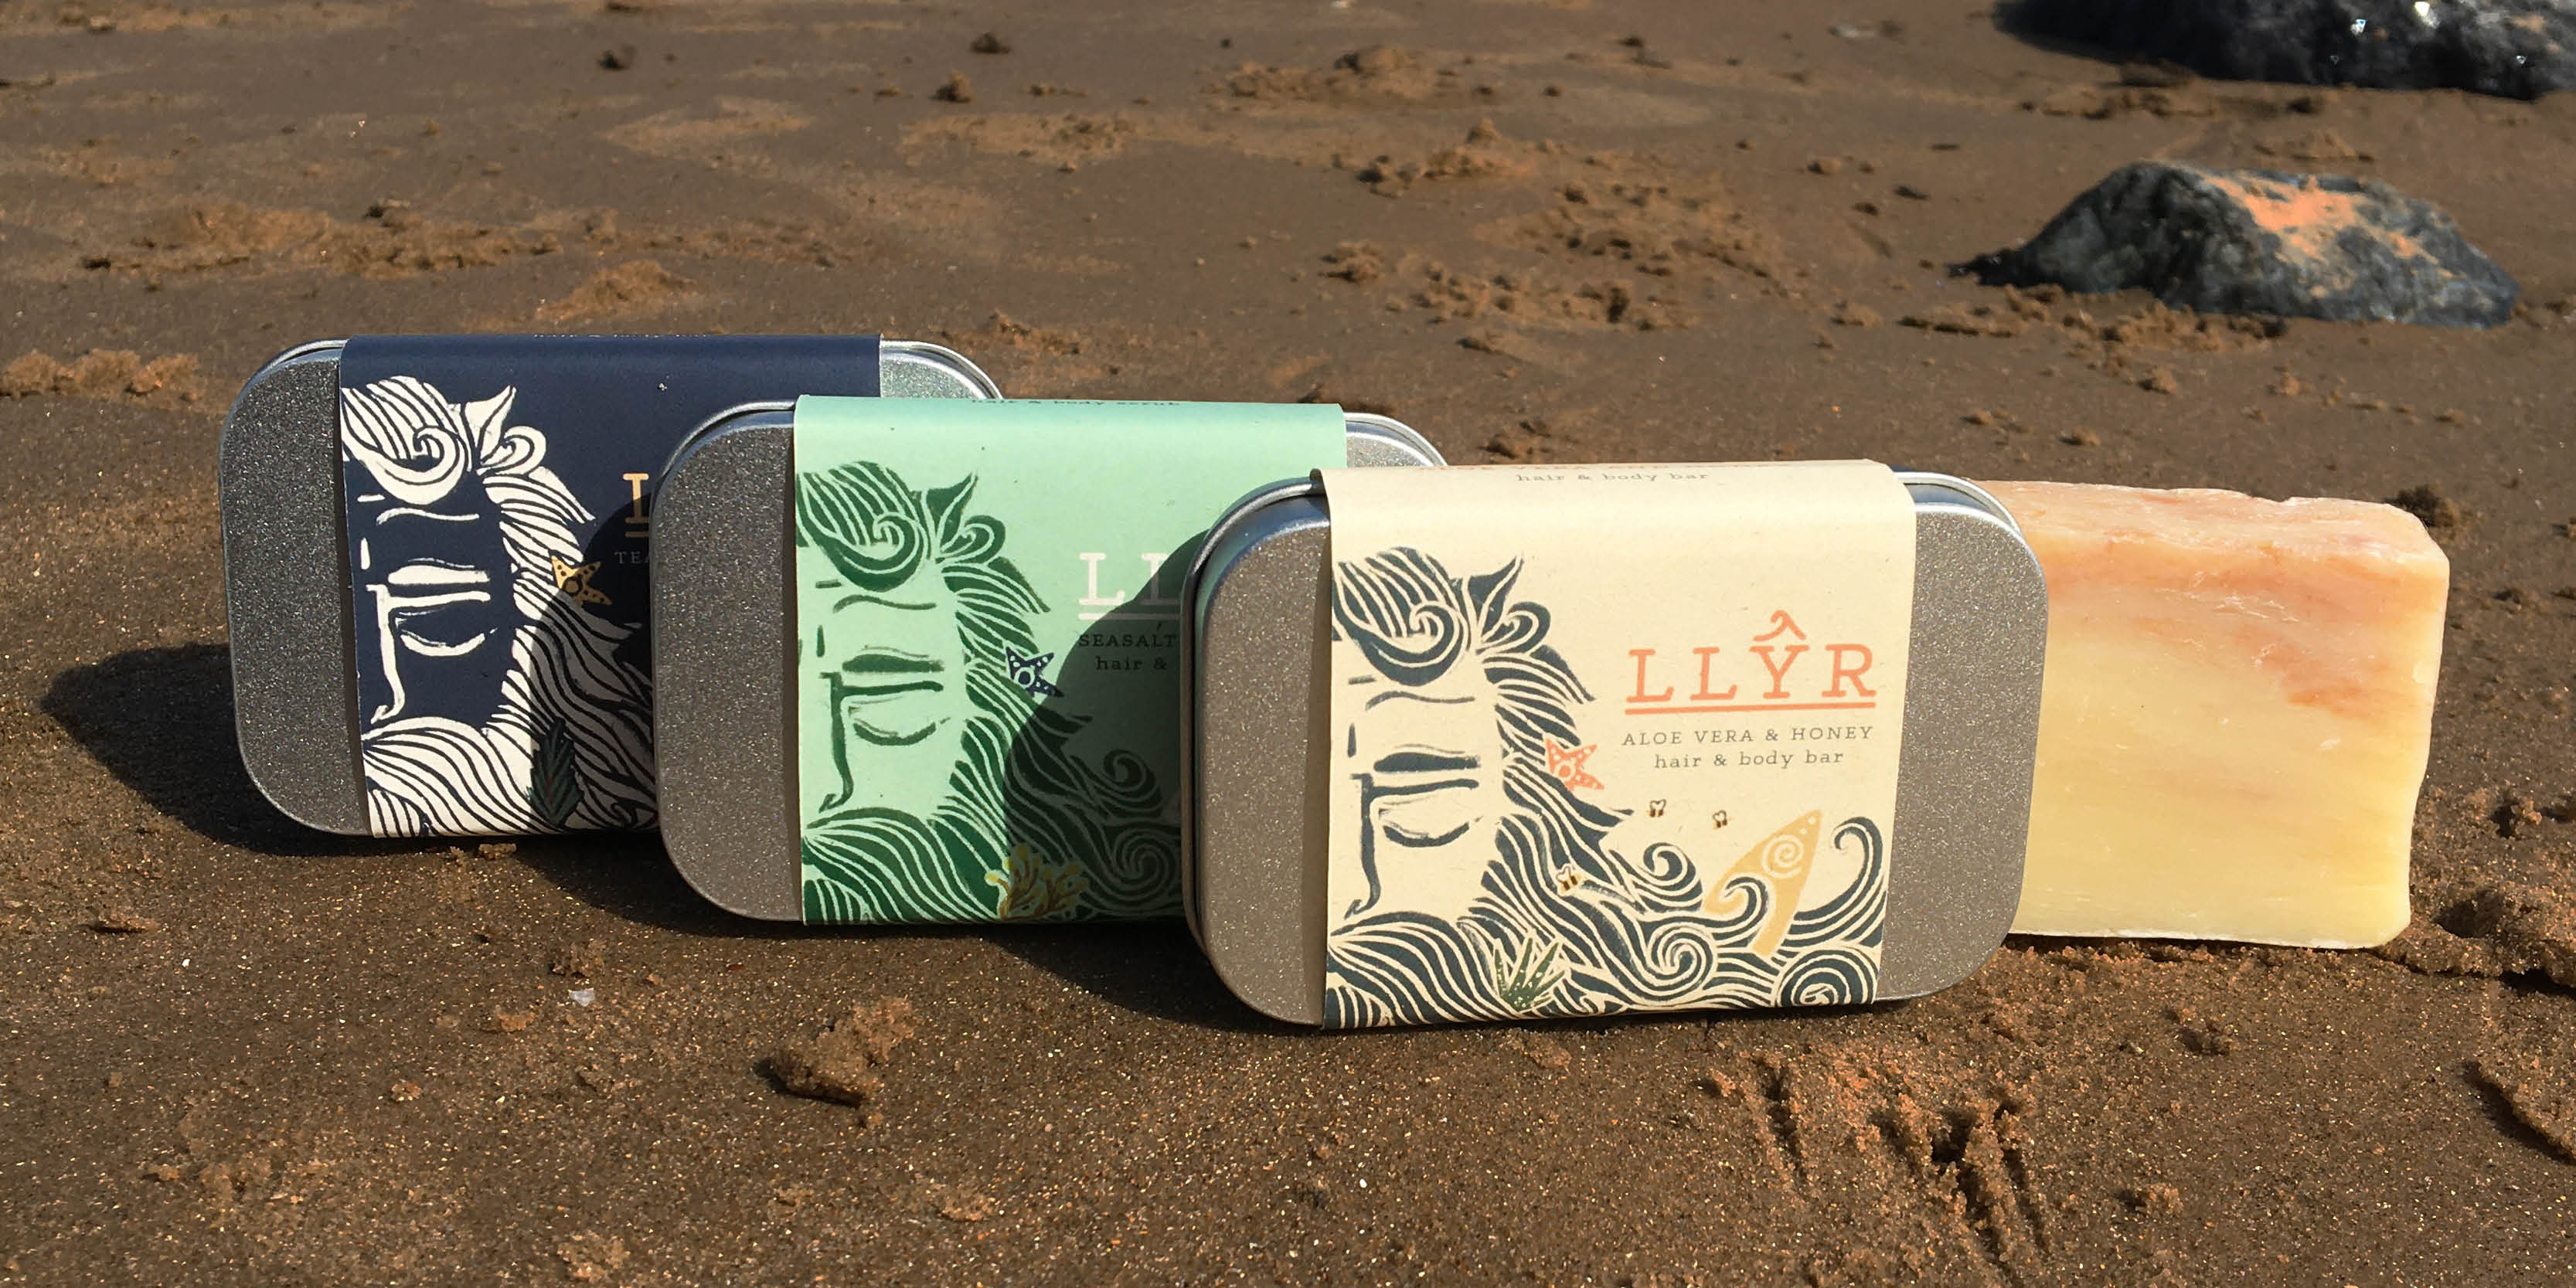 BA Graphic Design work by Tiarnie Stammers showing packaging for a soap brand called LlYR. The image shows an illustrated god figure on 3 different versions of soap.